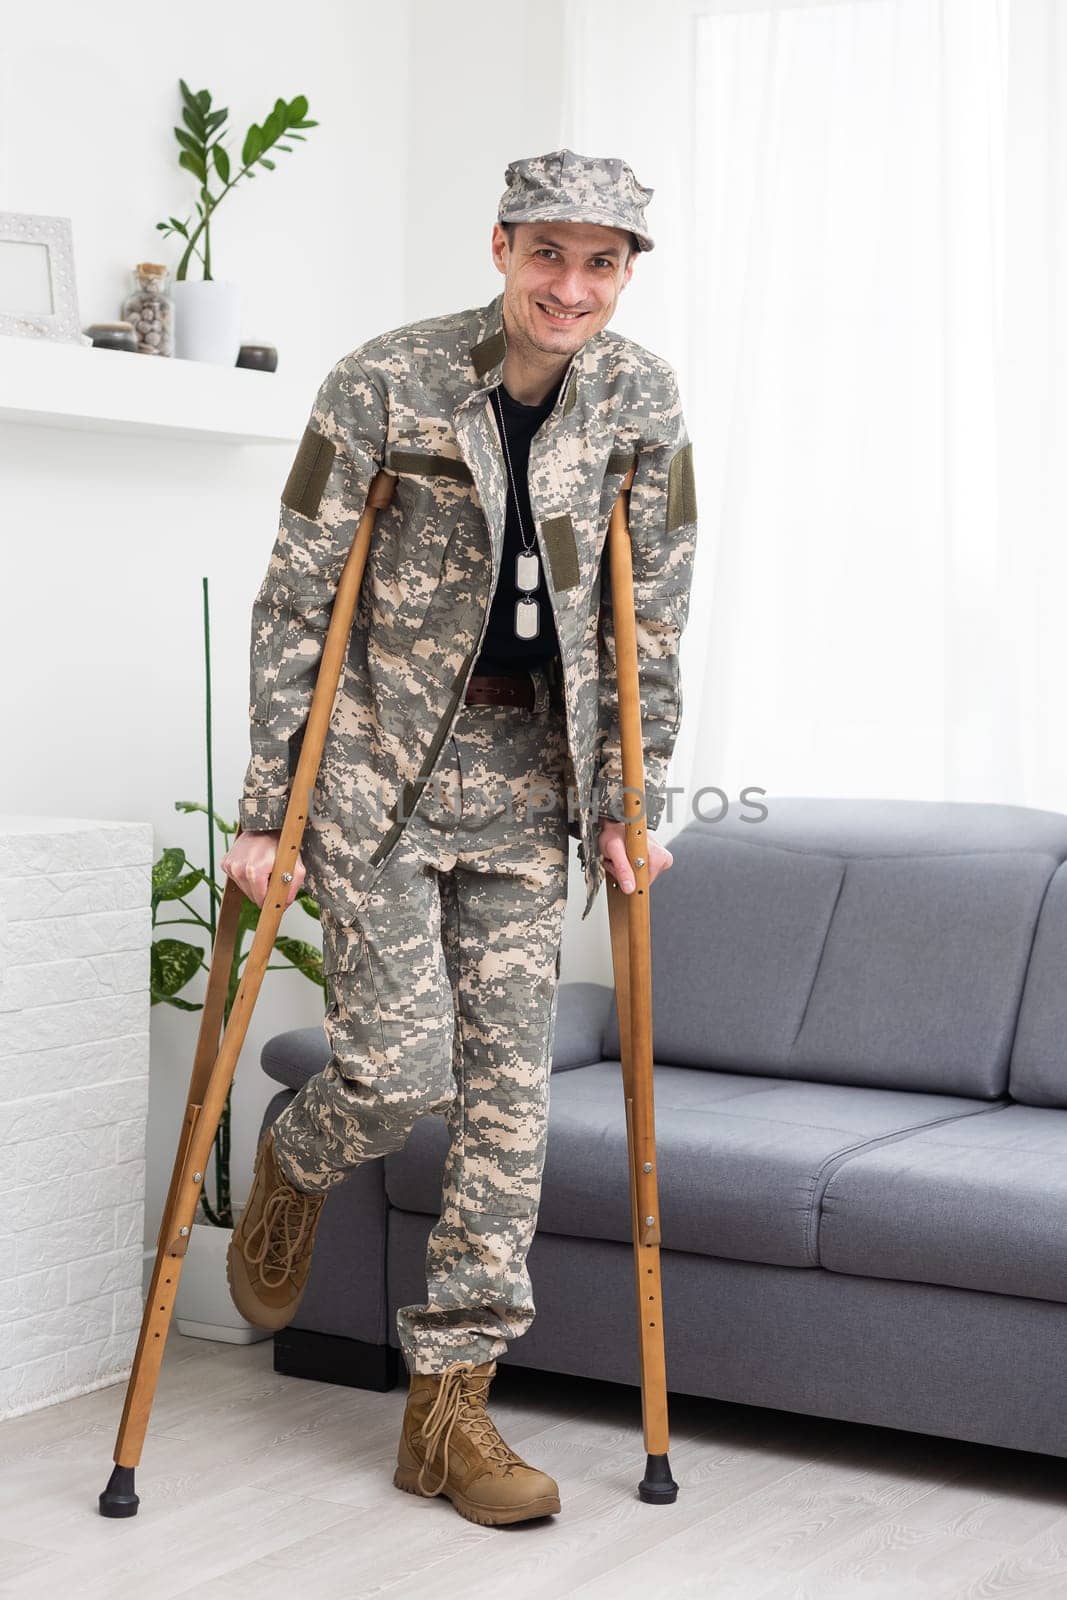 military Wounded Soldier Using Crutch by Andelov13